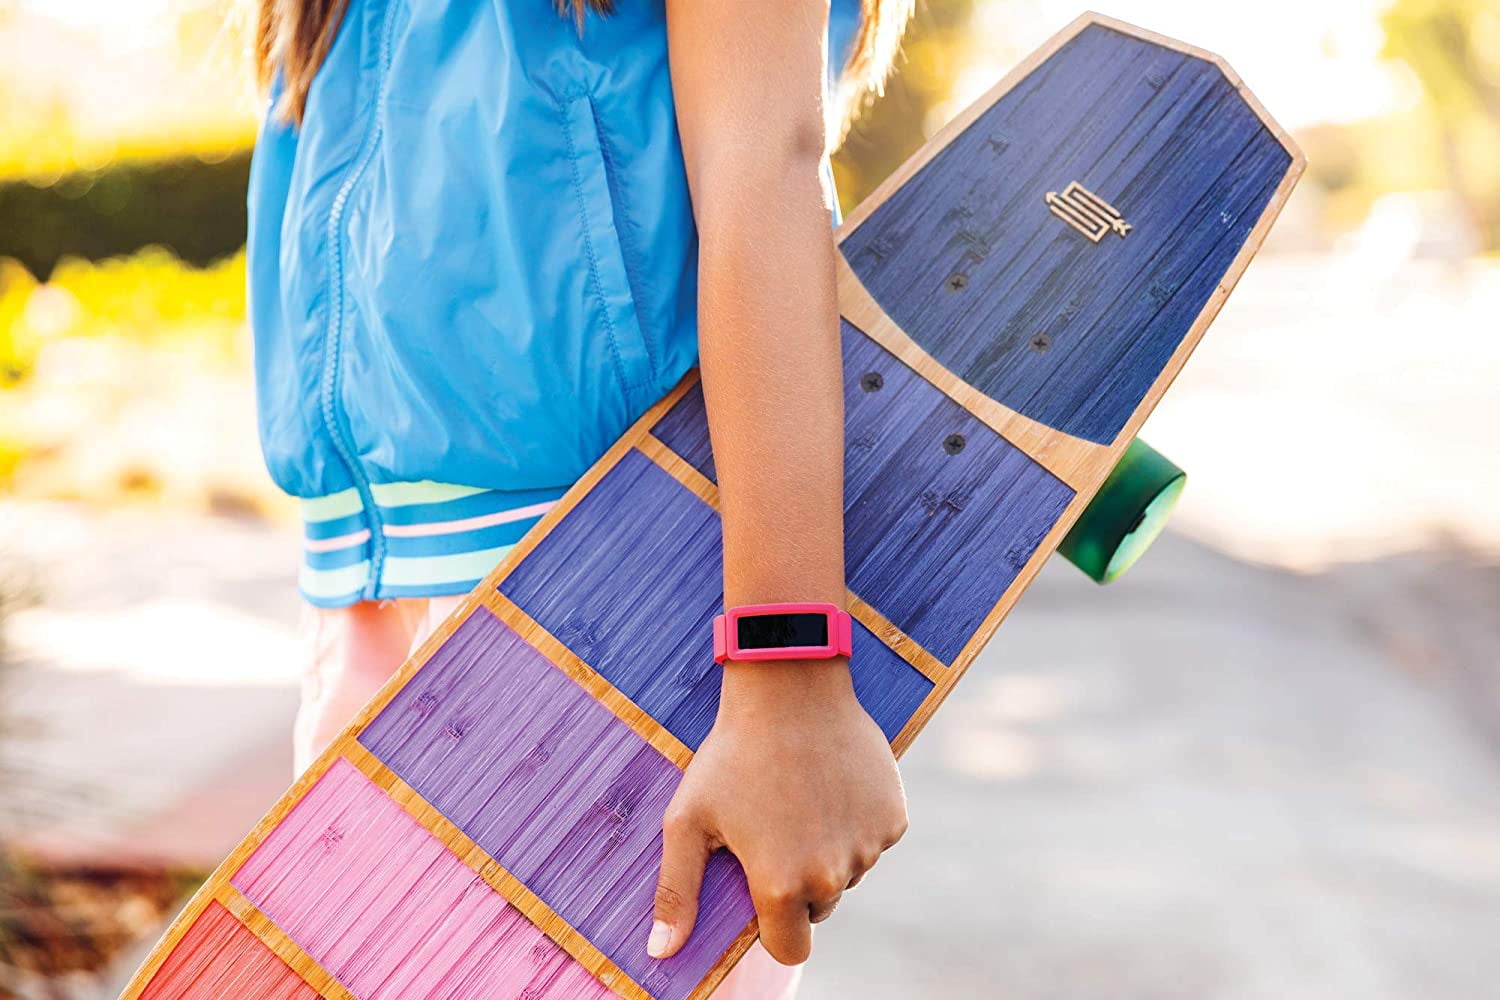 Fitbit Ace 2 Activity Tracker for Kids - Watermelon & Teal